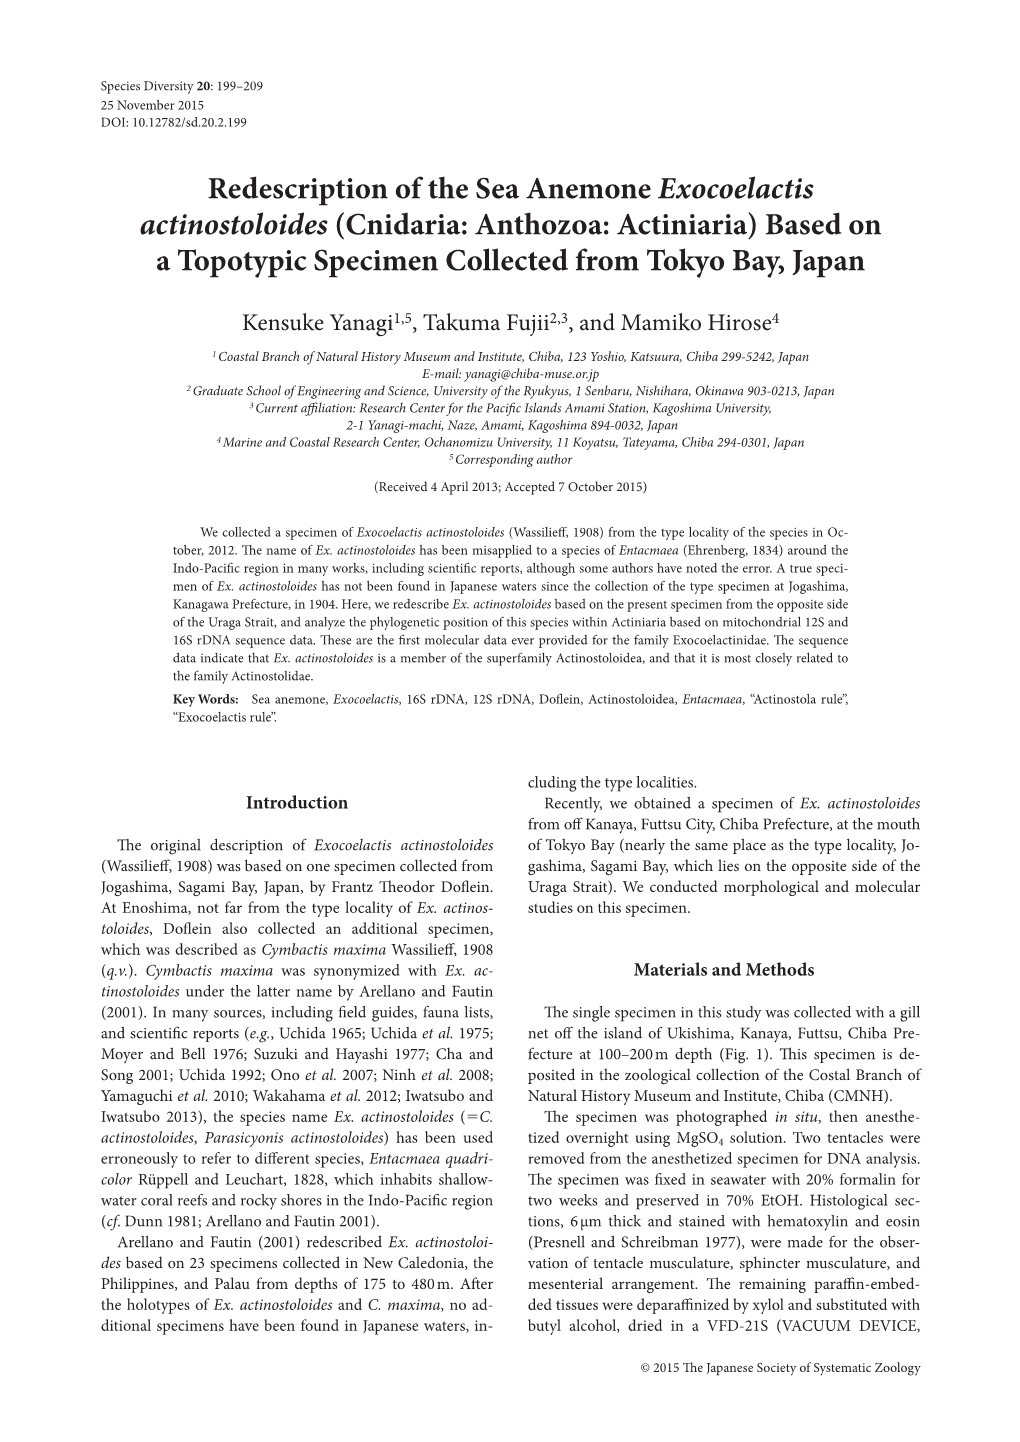 Redescription of the Sea Anemone Exocoelactis Actinostoloides (Cnidaria: Anthozoa: Actiniaria) Based on a Topotypic Specimen Collected from Tokyo Bay, Japan